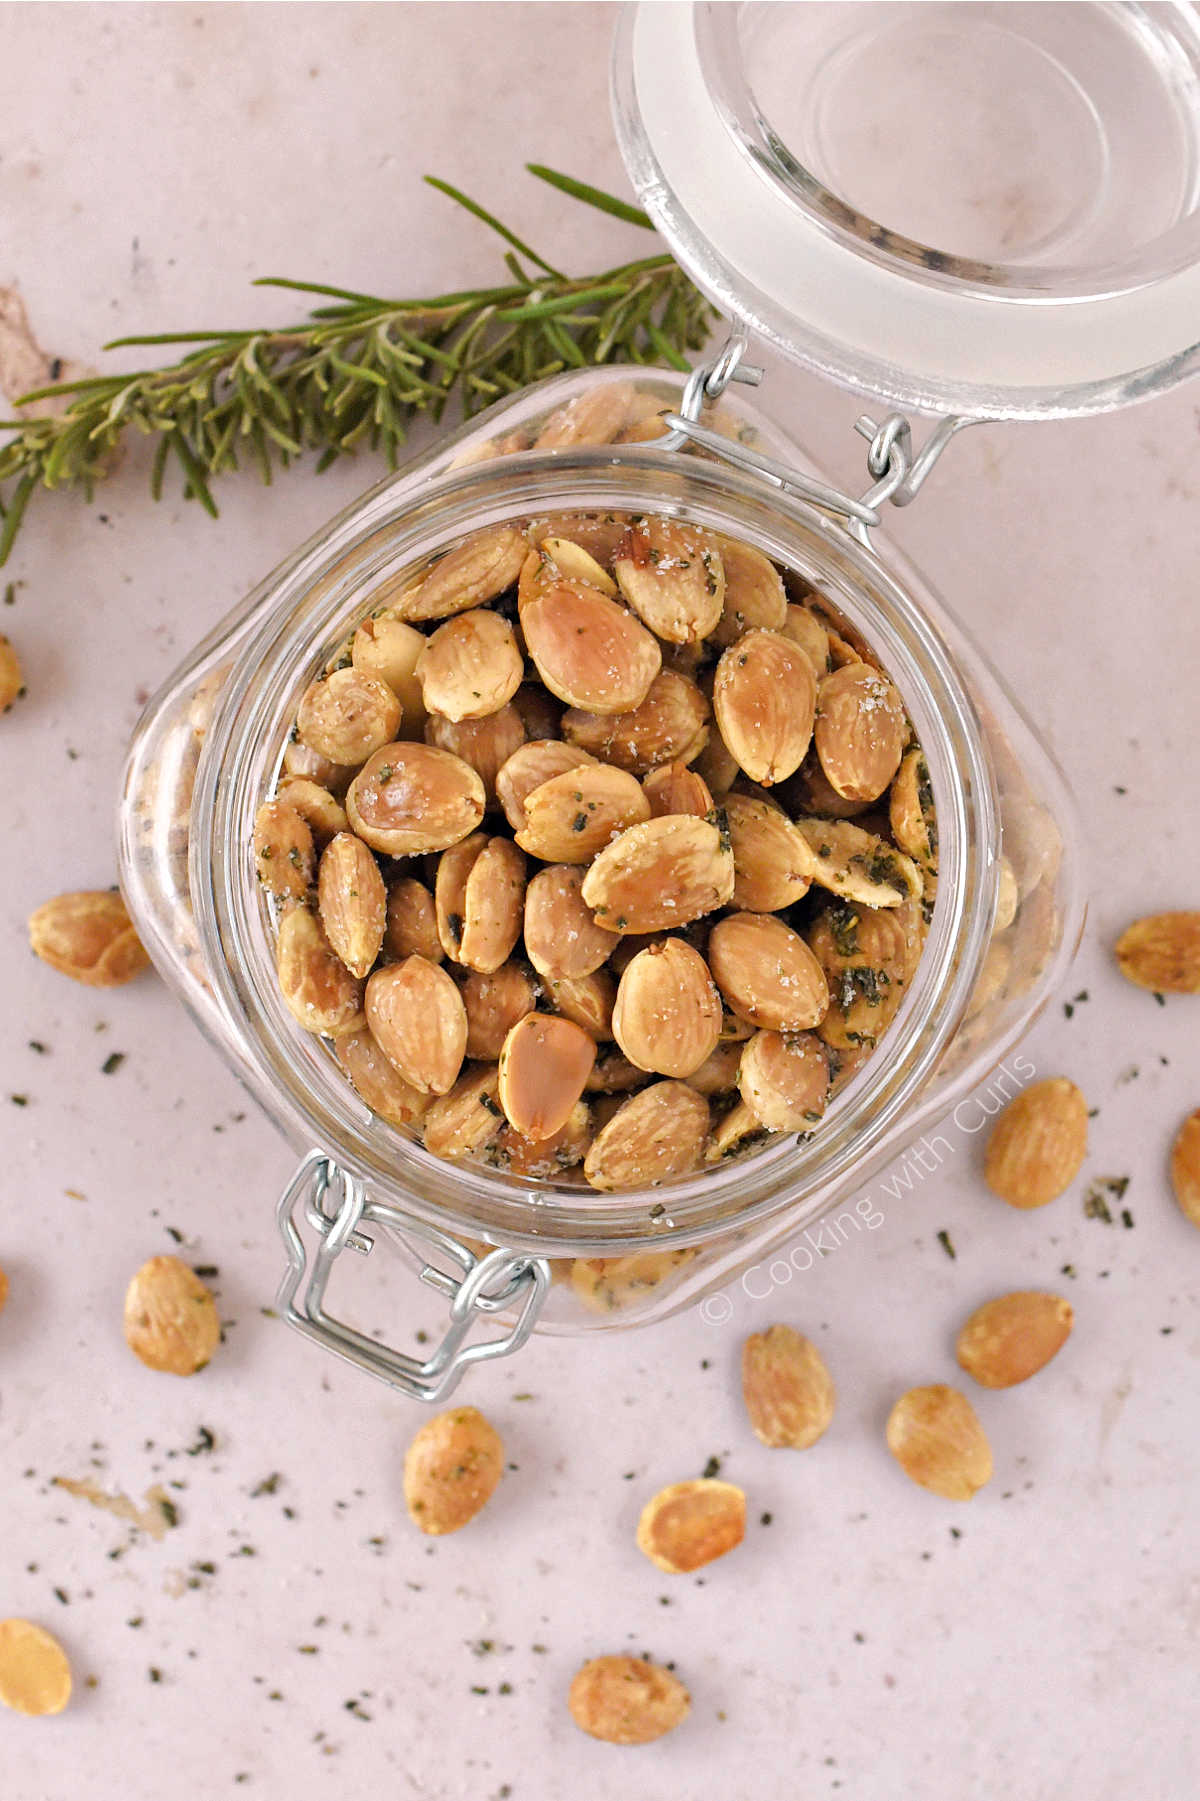 Looking down on a jar filled with rosemary marcona almonds surrounded by almonds and a sprig of rosemary.